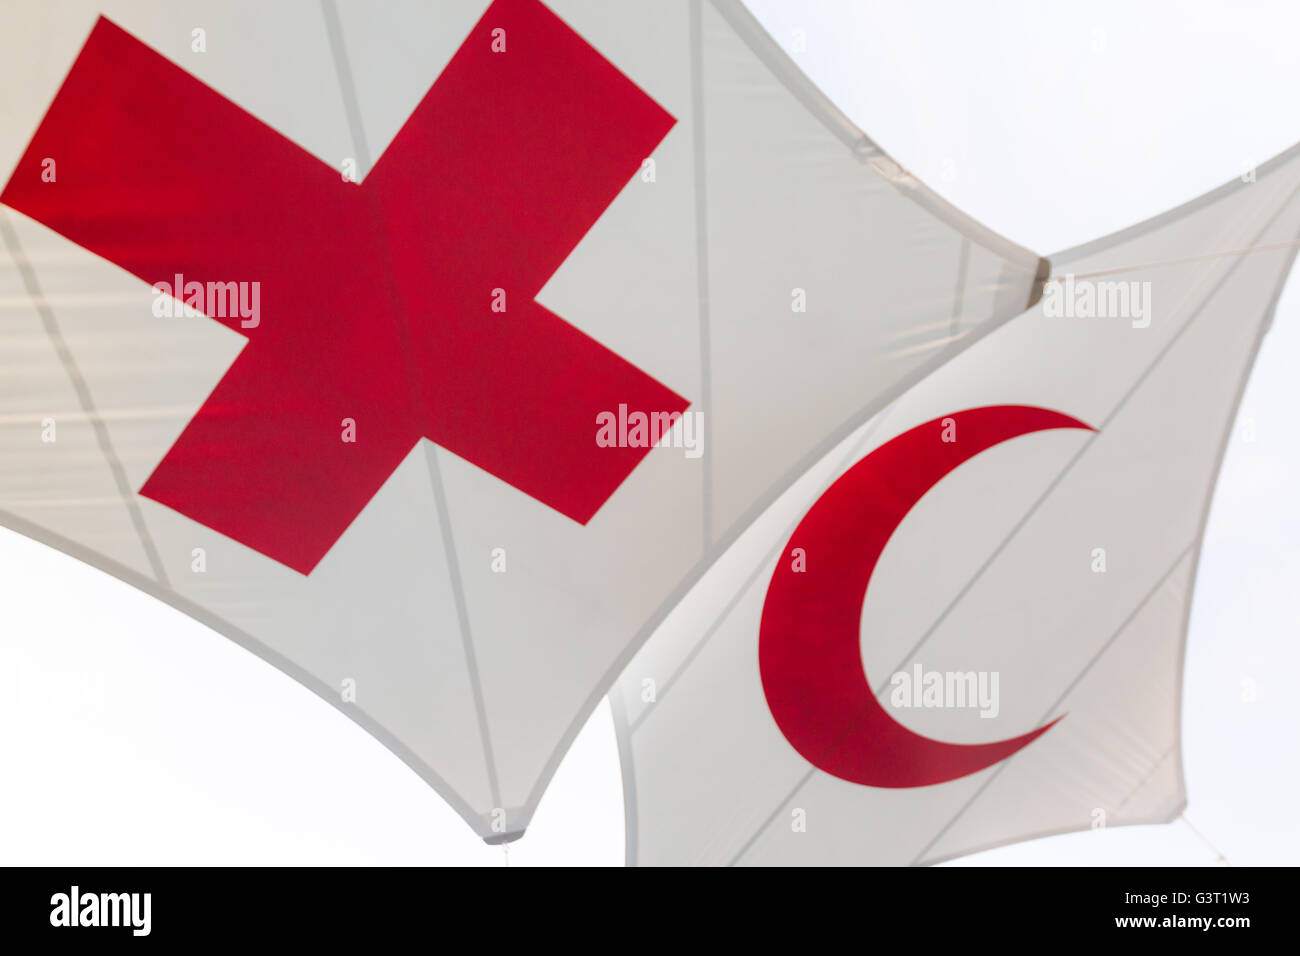 Red cross, Red Crescent flag Stock Photo